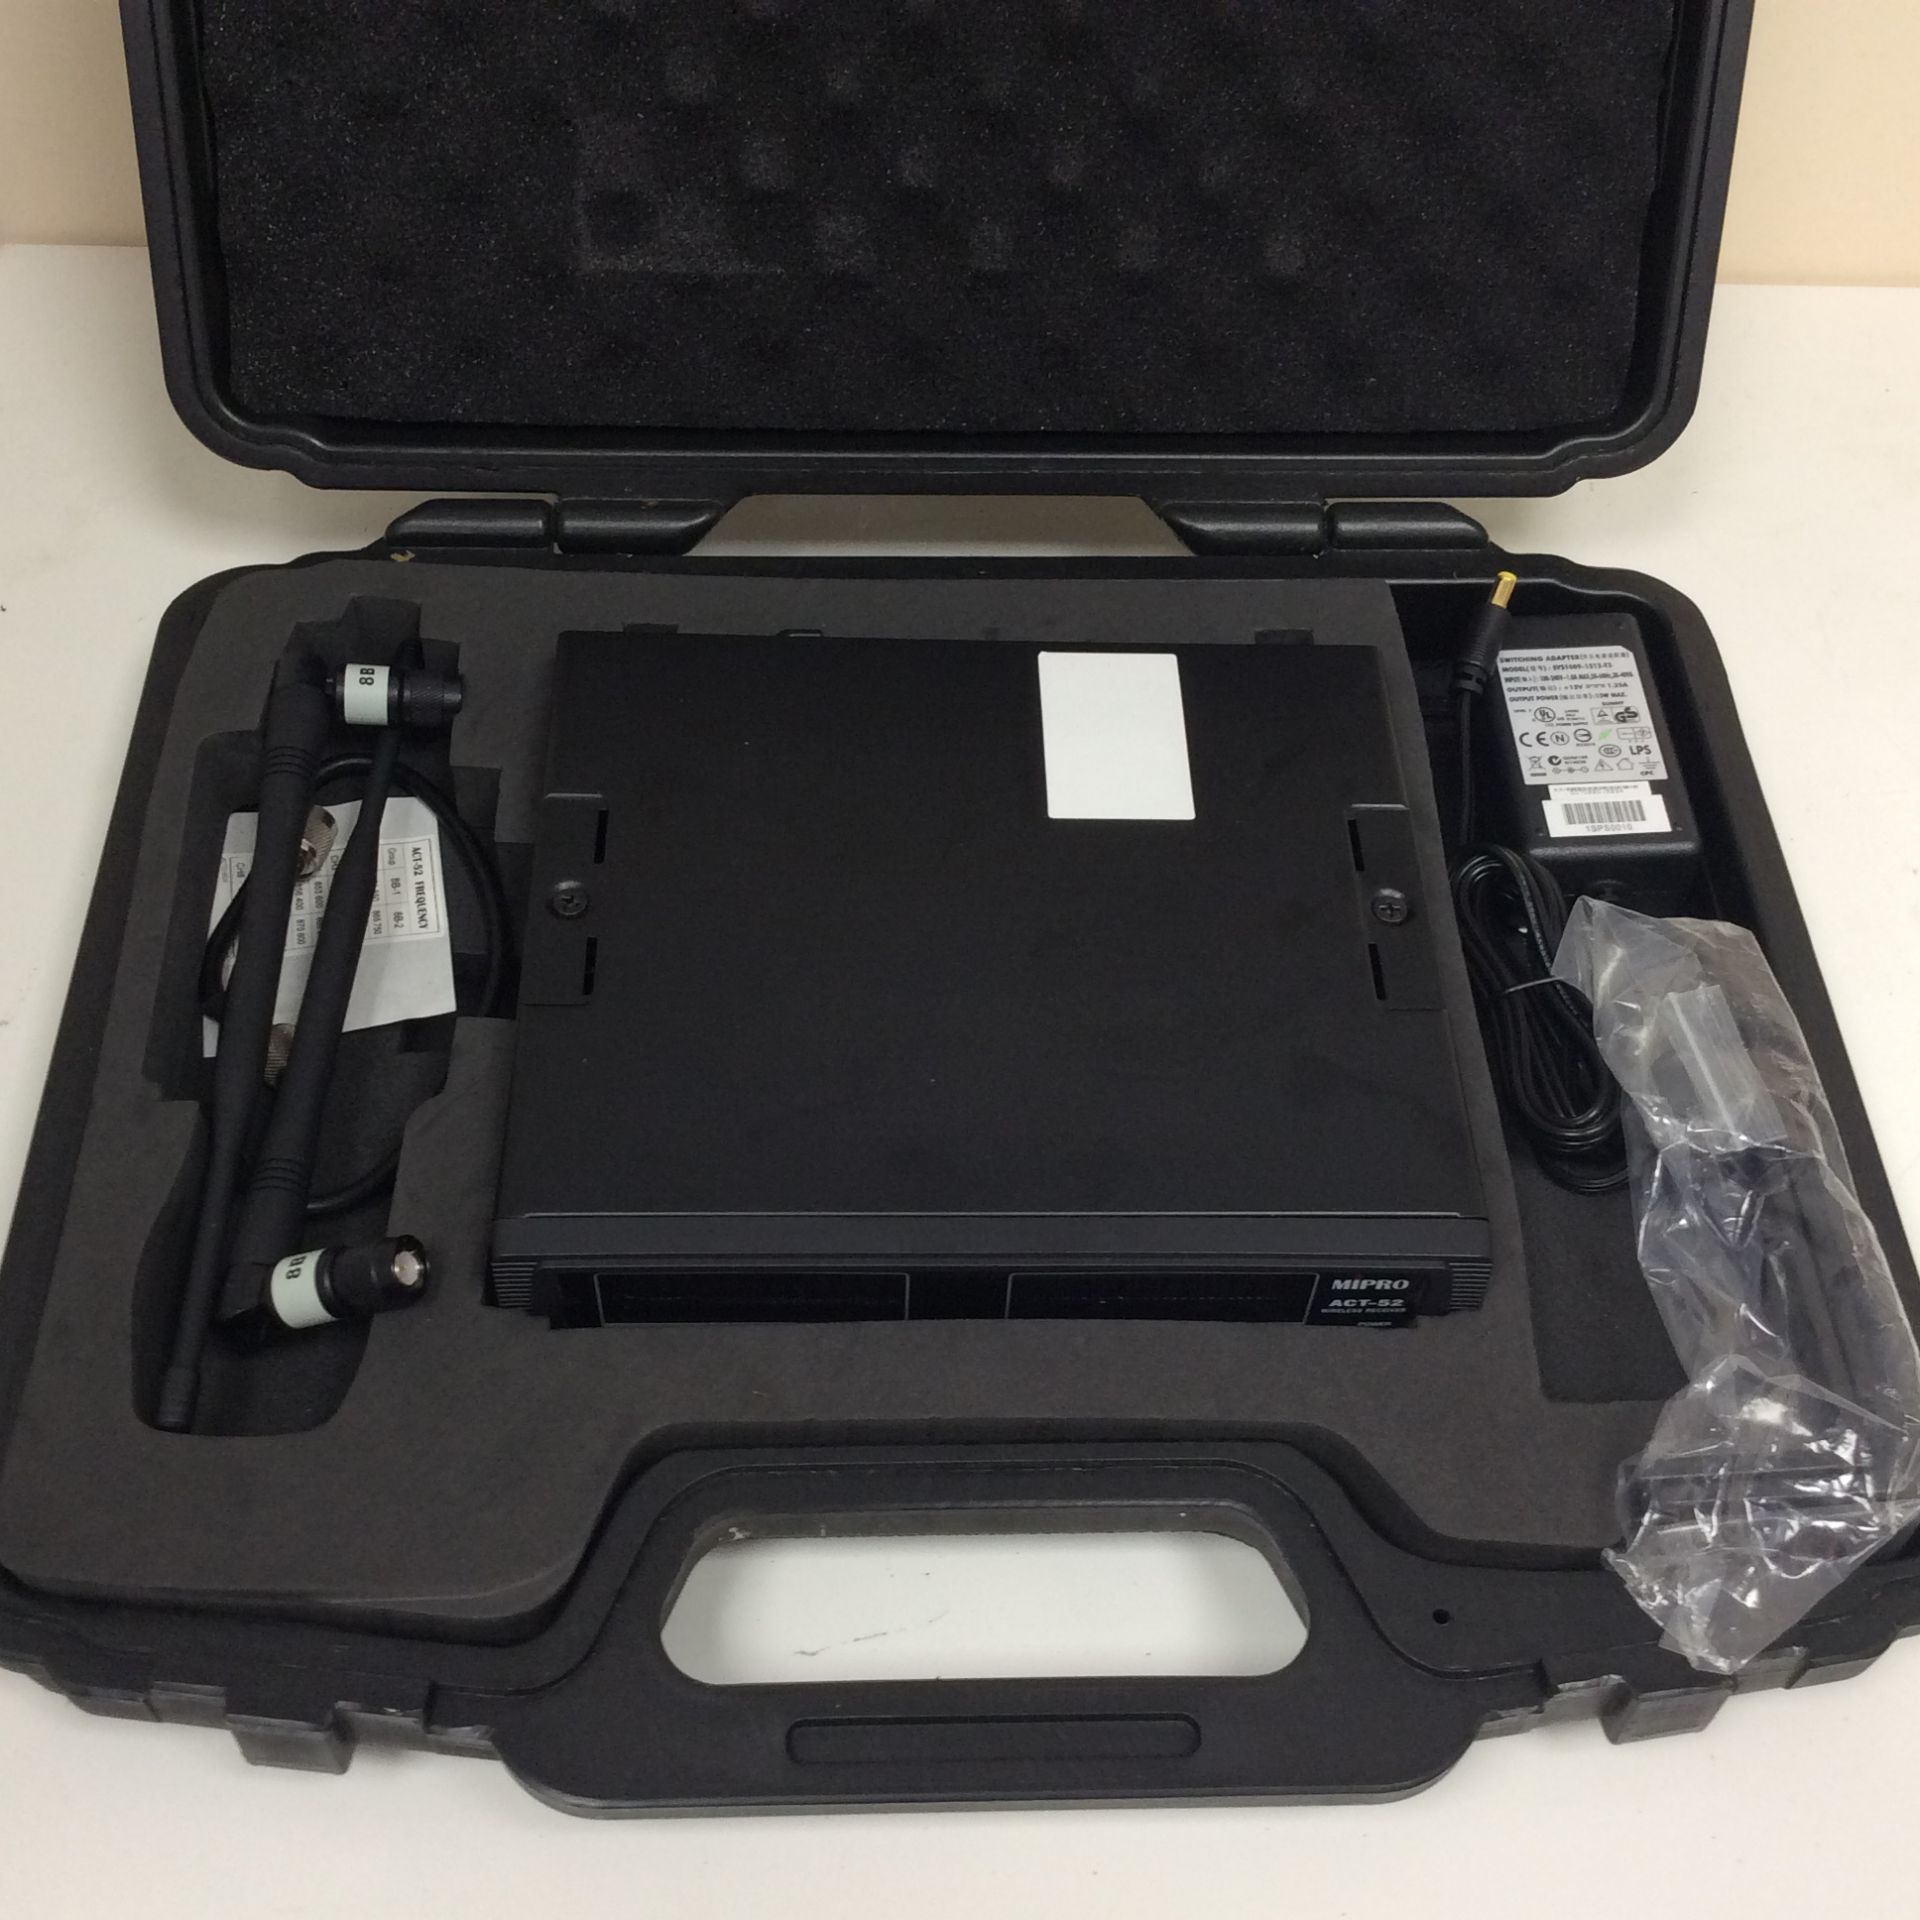 Mipro act-52 wireless receiver in carry case - Image 3 of 4